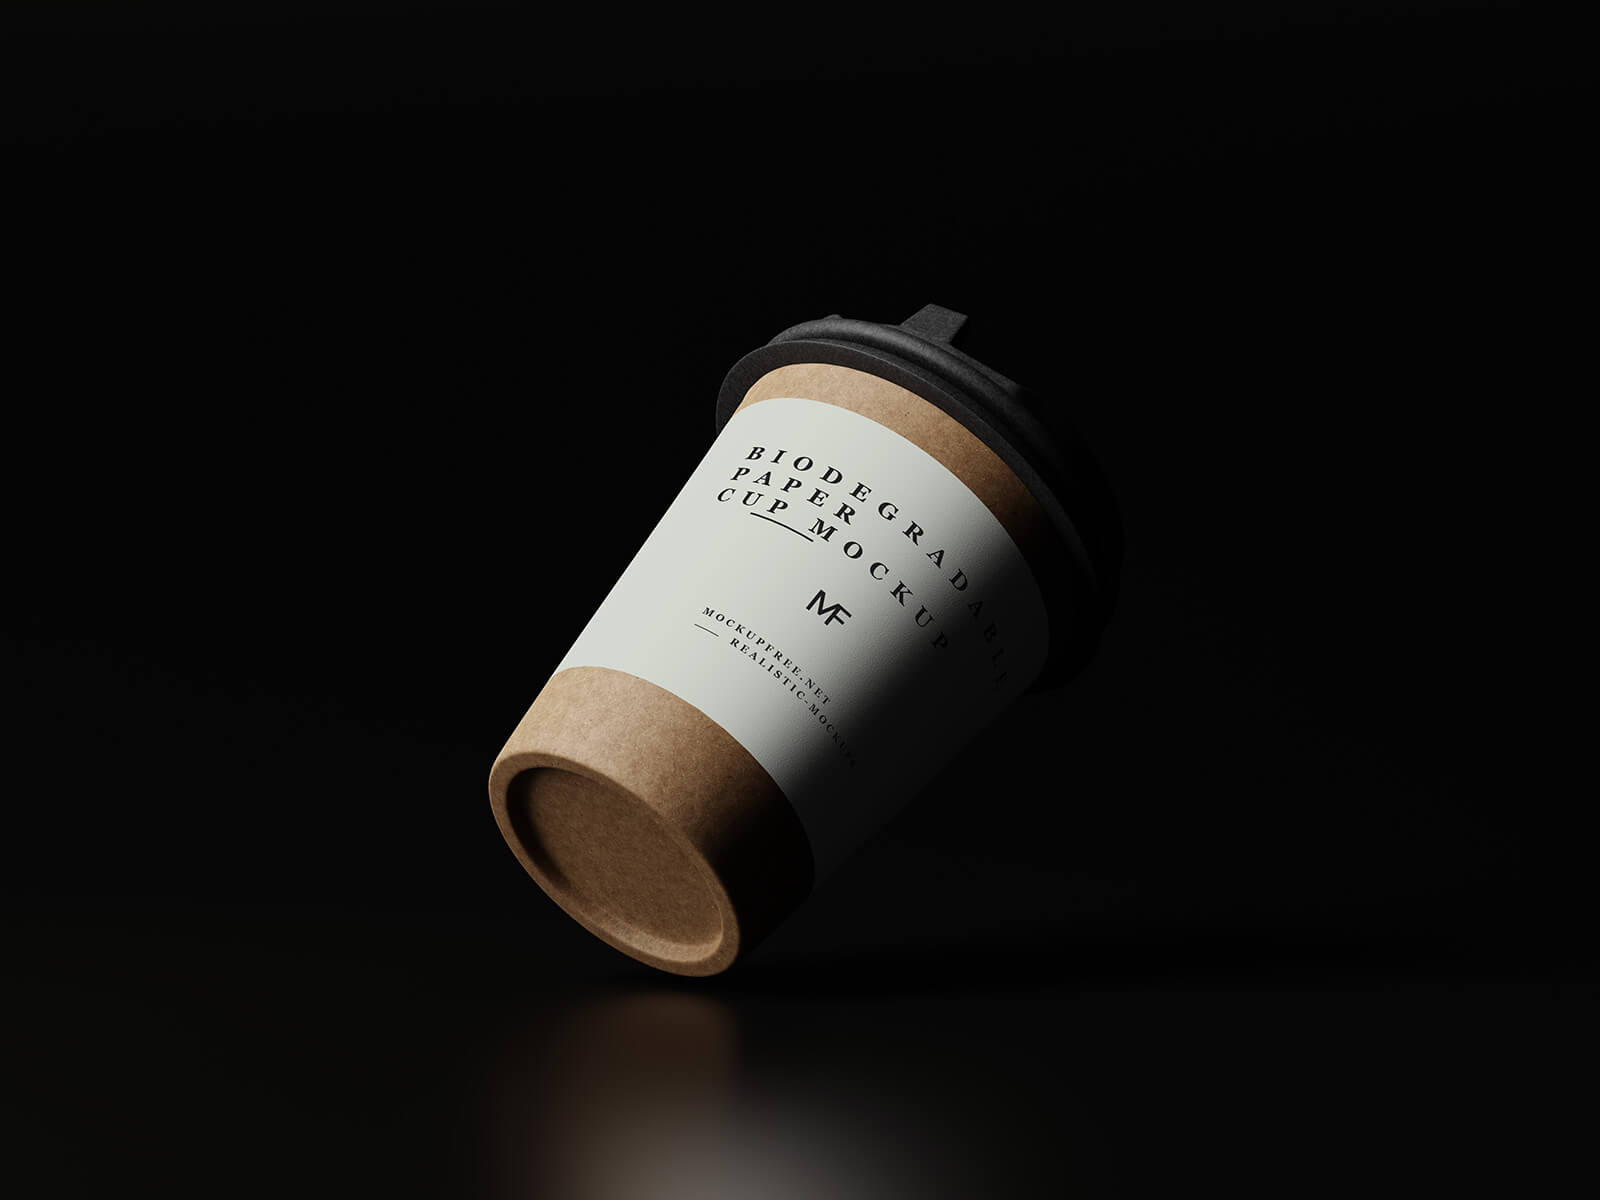 10 Free Eco-Friendly Paper Coffee Cup Mockup PSD Files